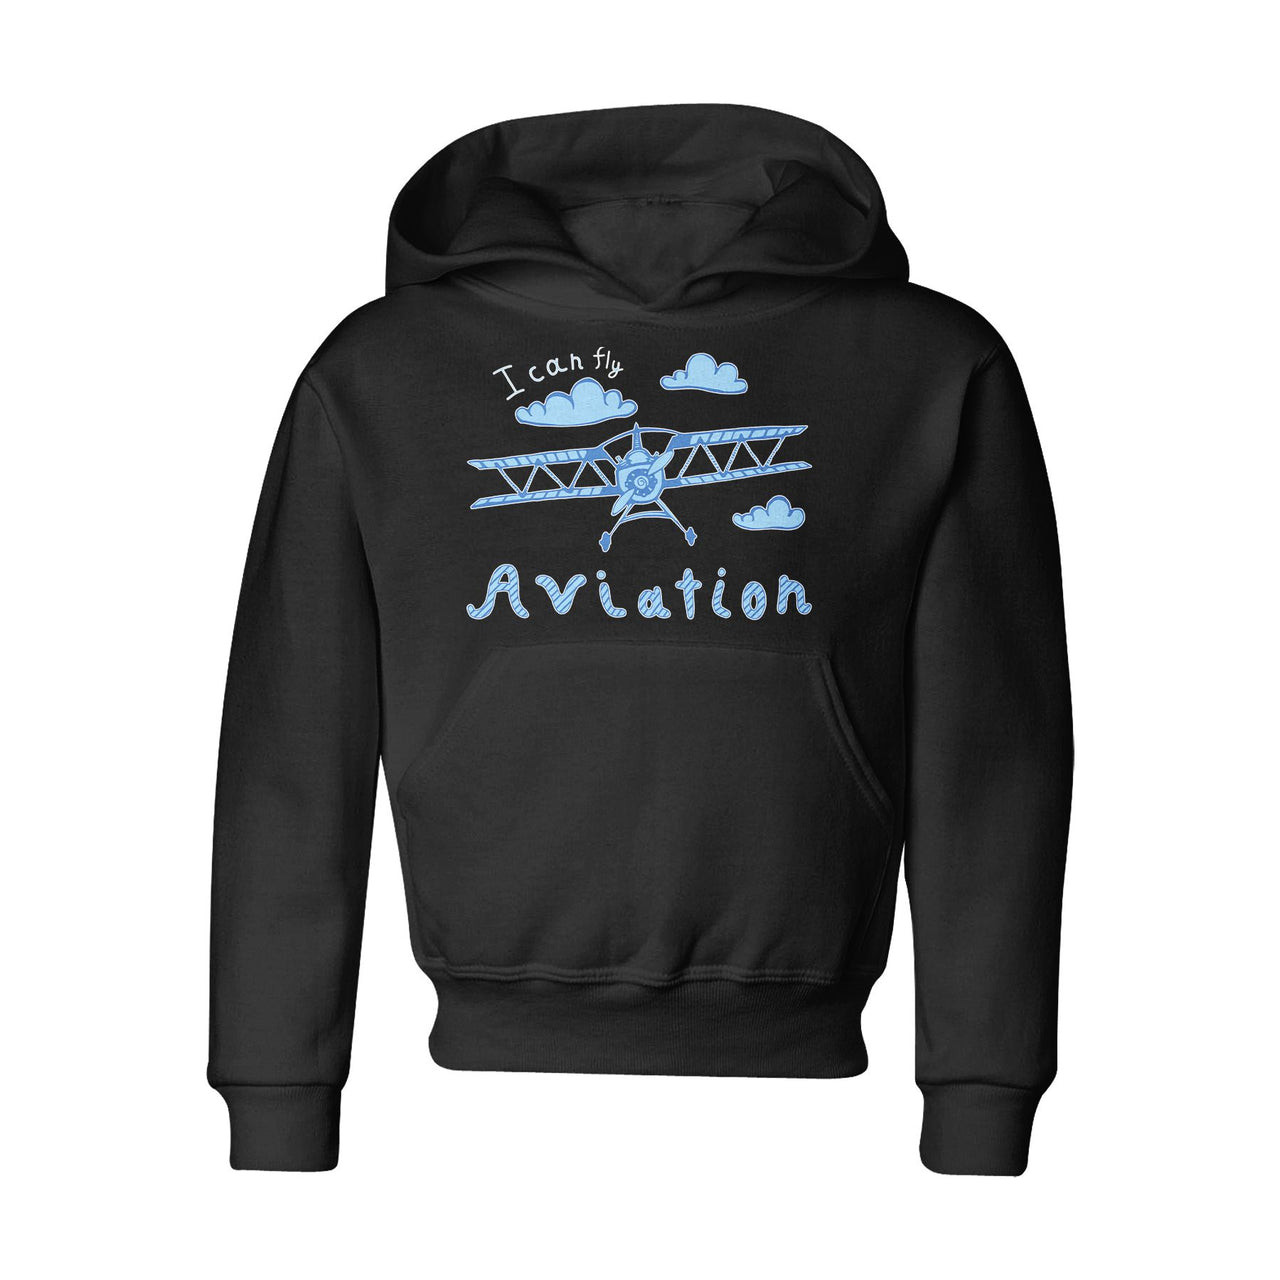 I Can Fly & Aviation Designed "CHILDREN" Hoodies